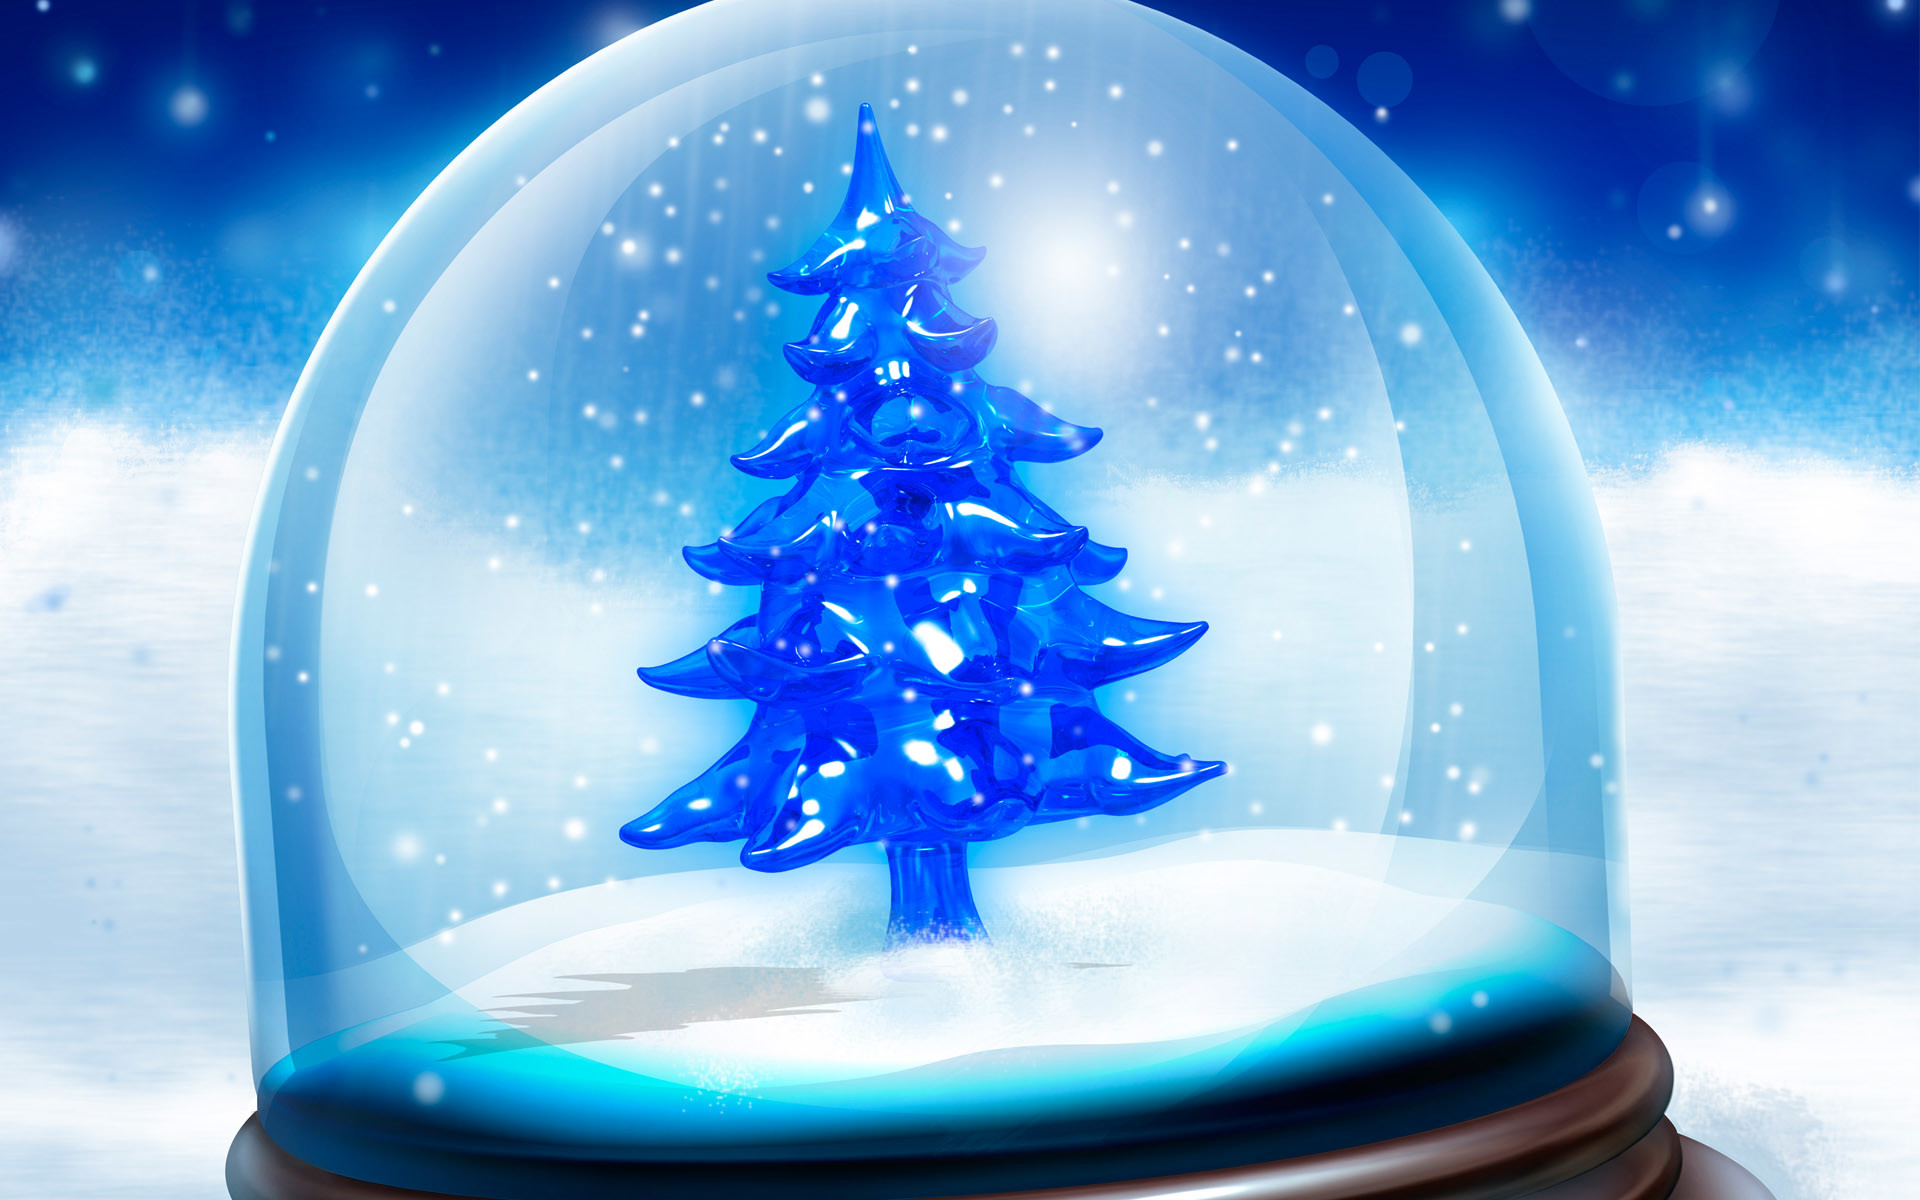 1920x1200 3d Christmas Tree Wallpapers | Free 3d Christmas Tree Backgrounds .